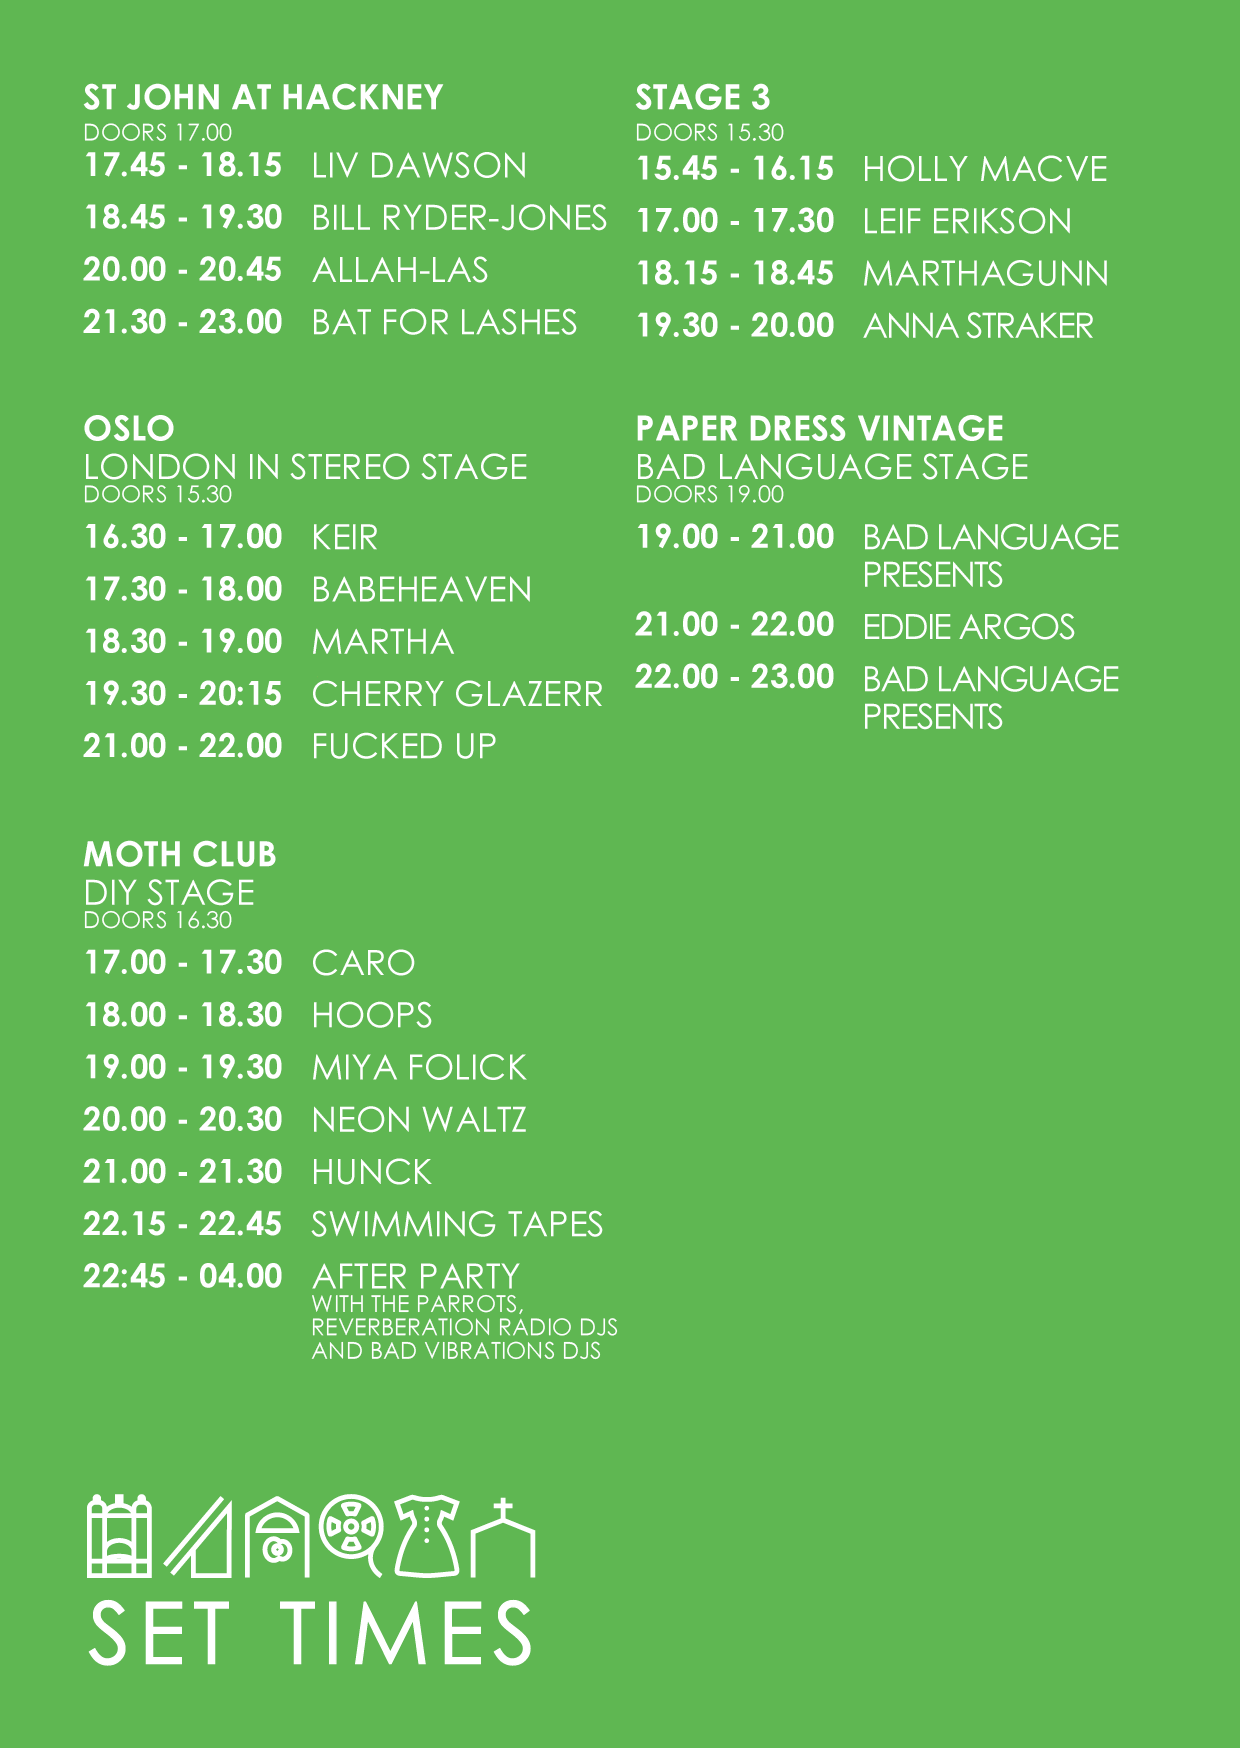 Get planning - Mirrors London announces stage times for 2016